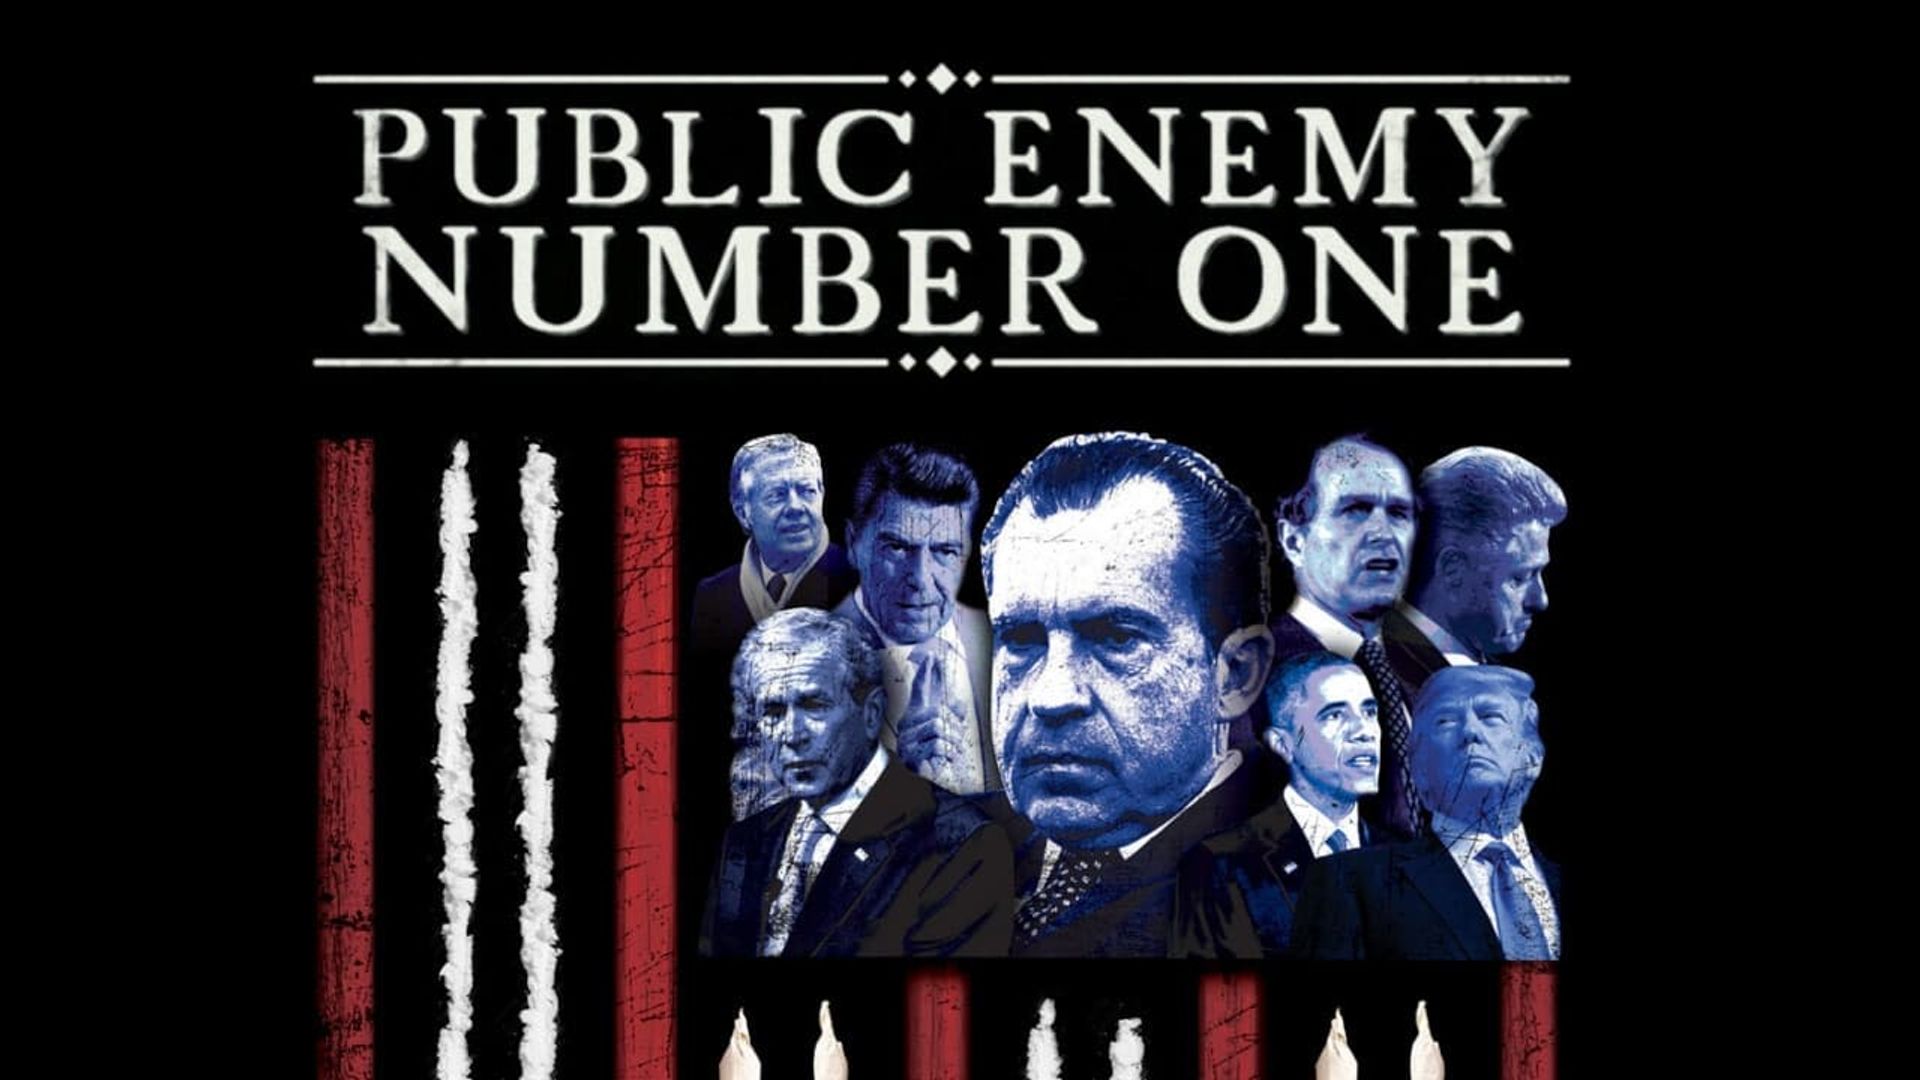 Public Enemy Number One background